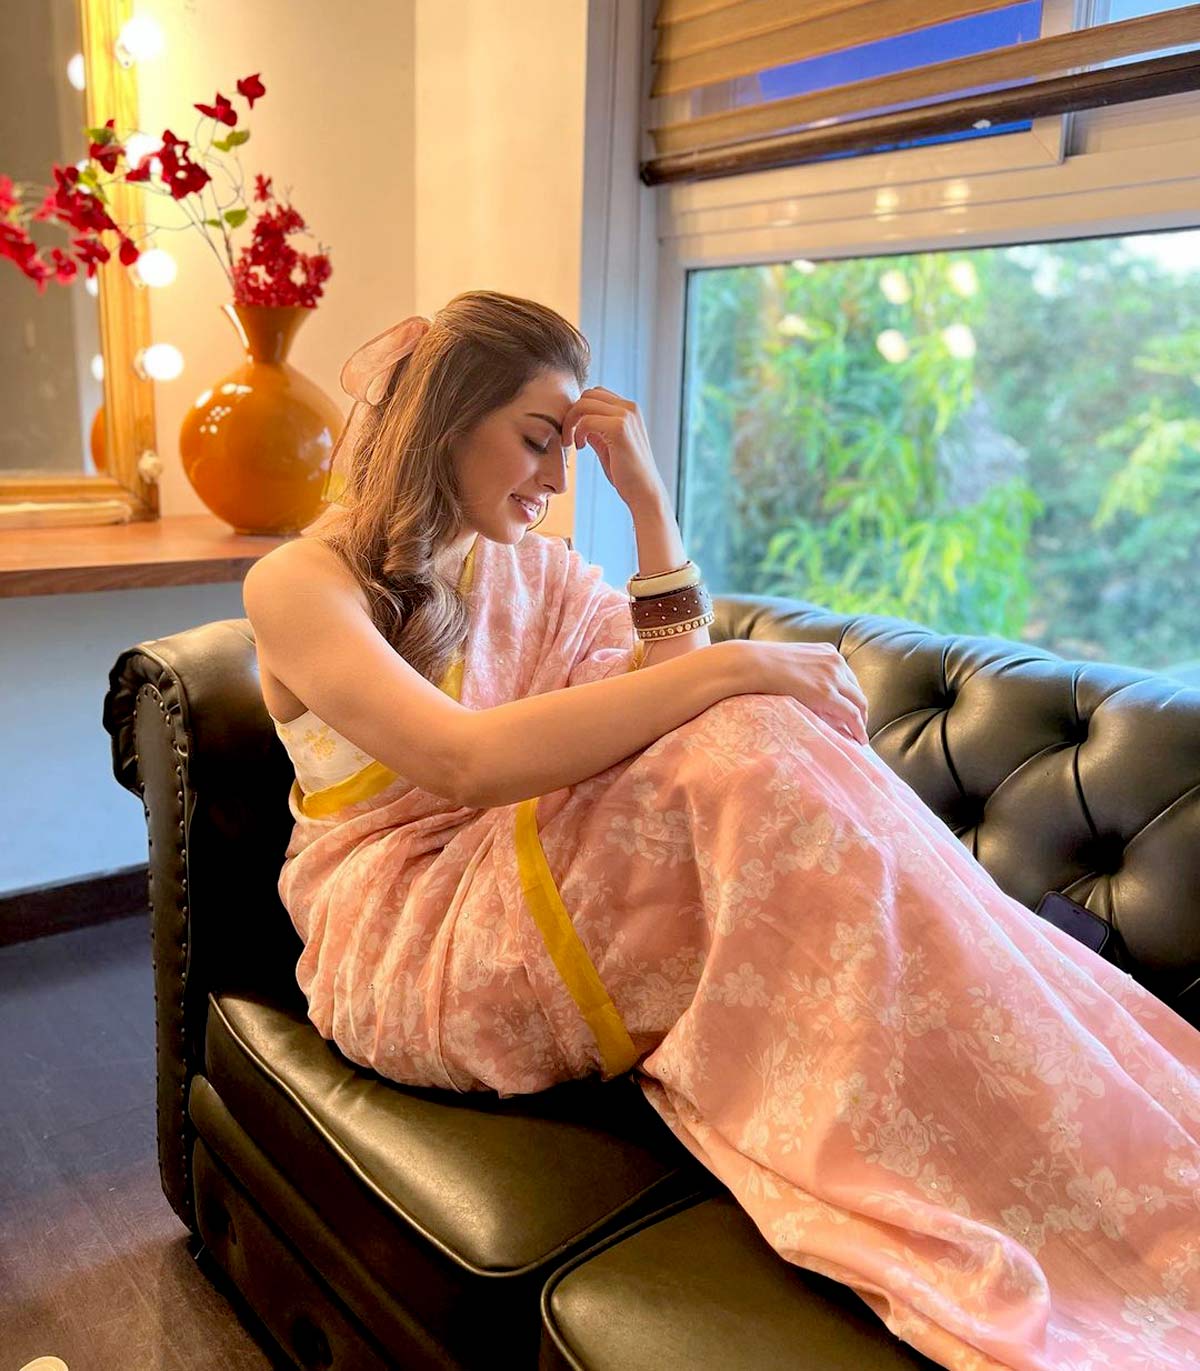 Hansika Motwani's casual street style in a crop top and pink pants!